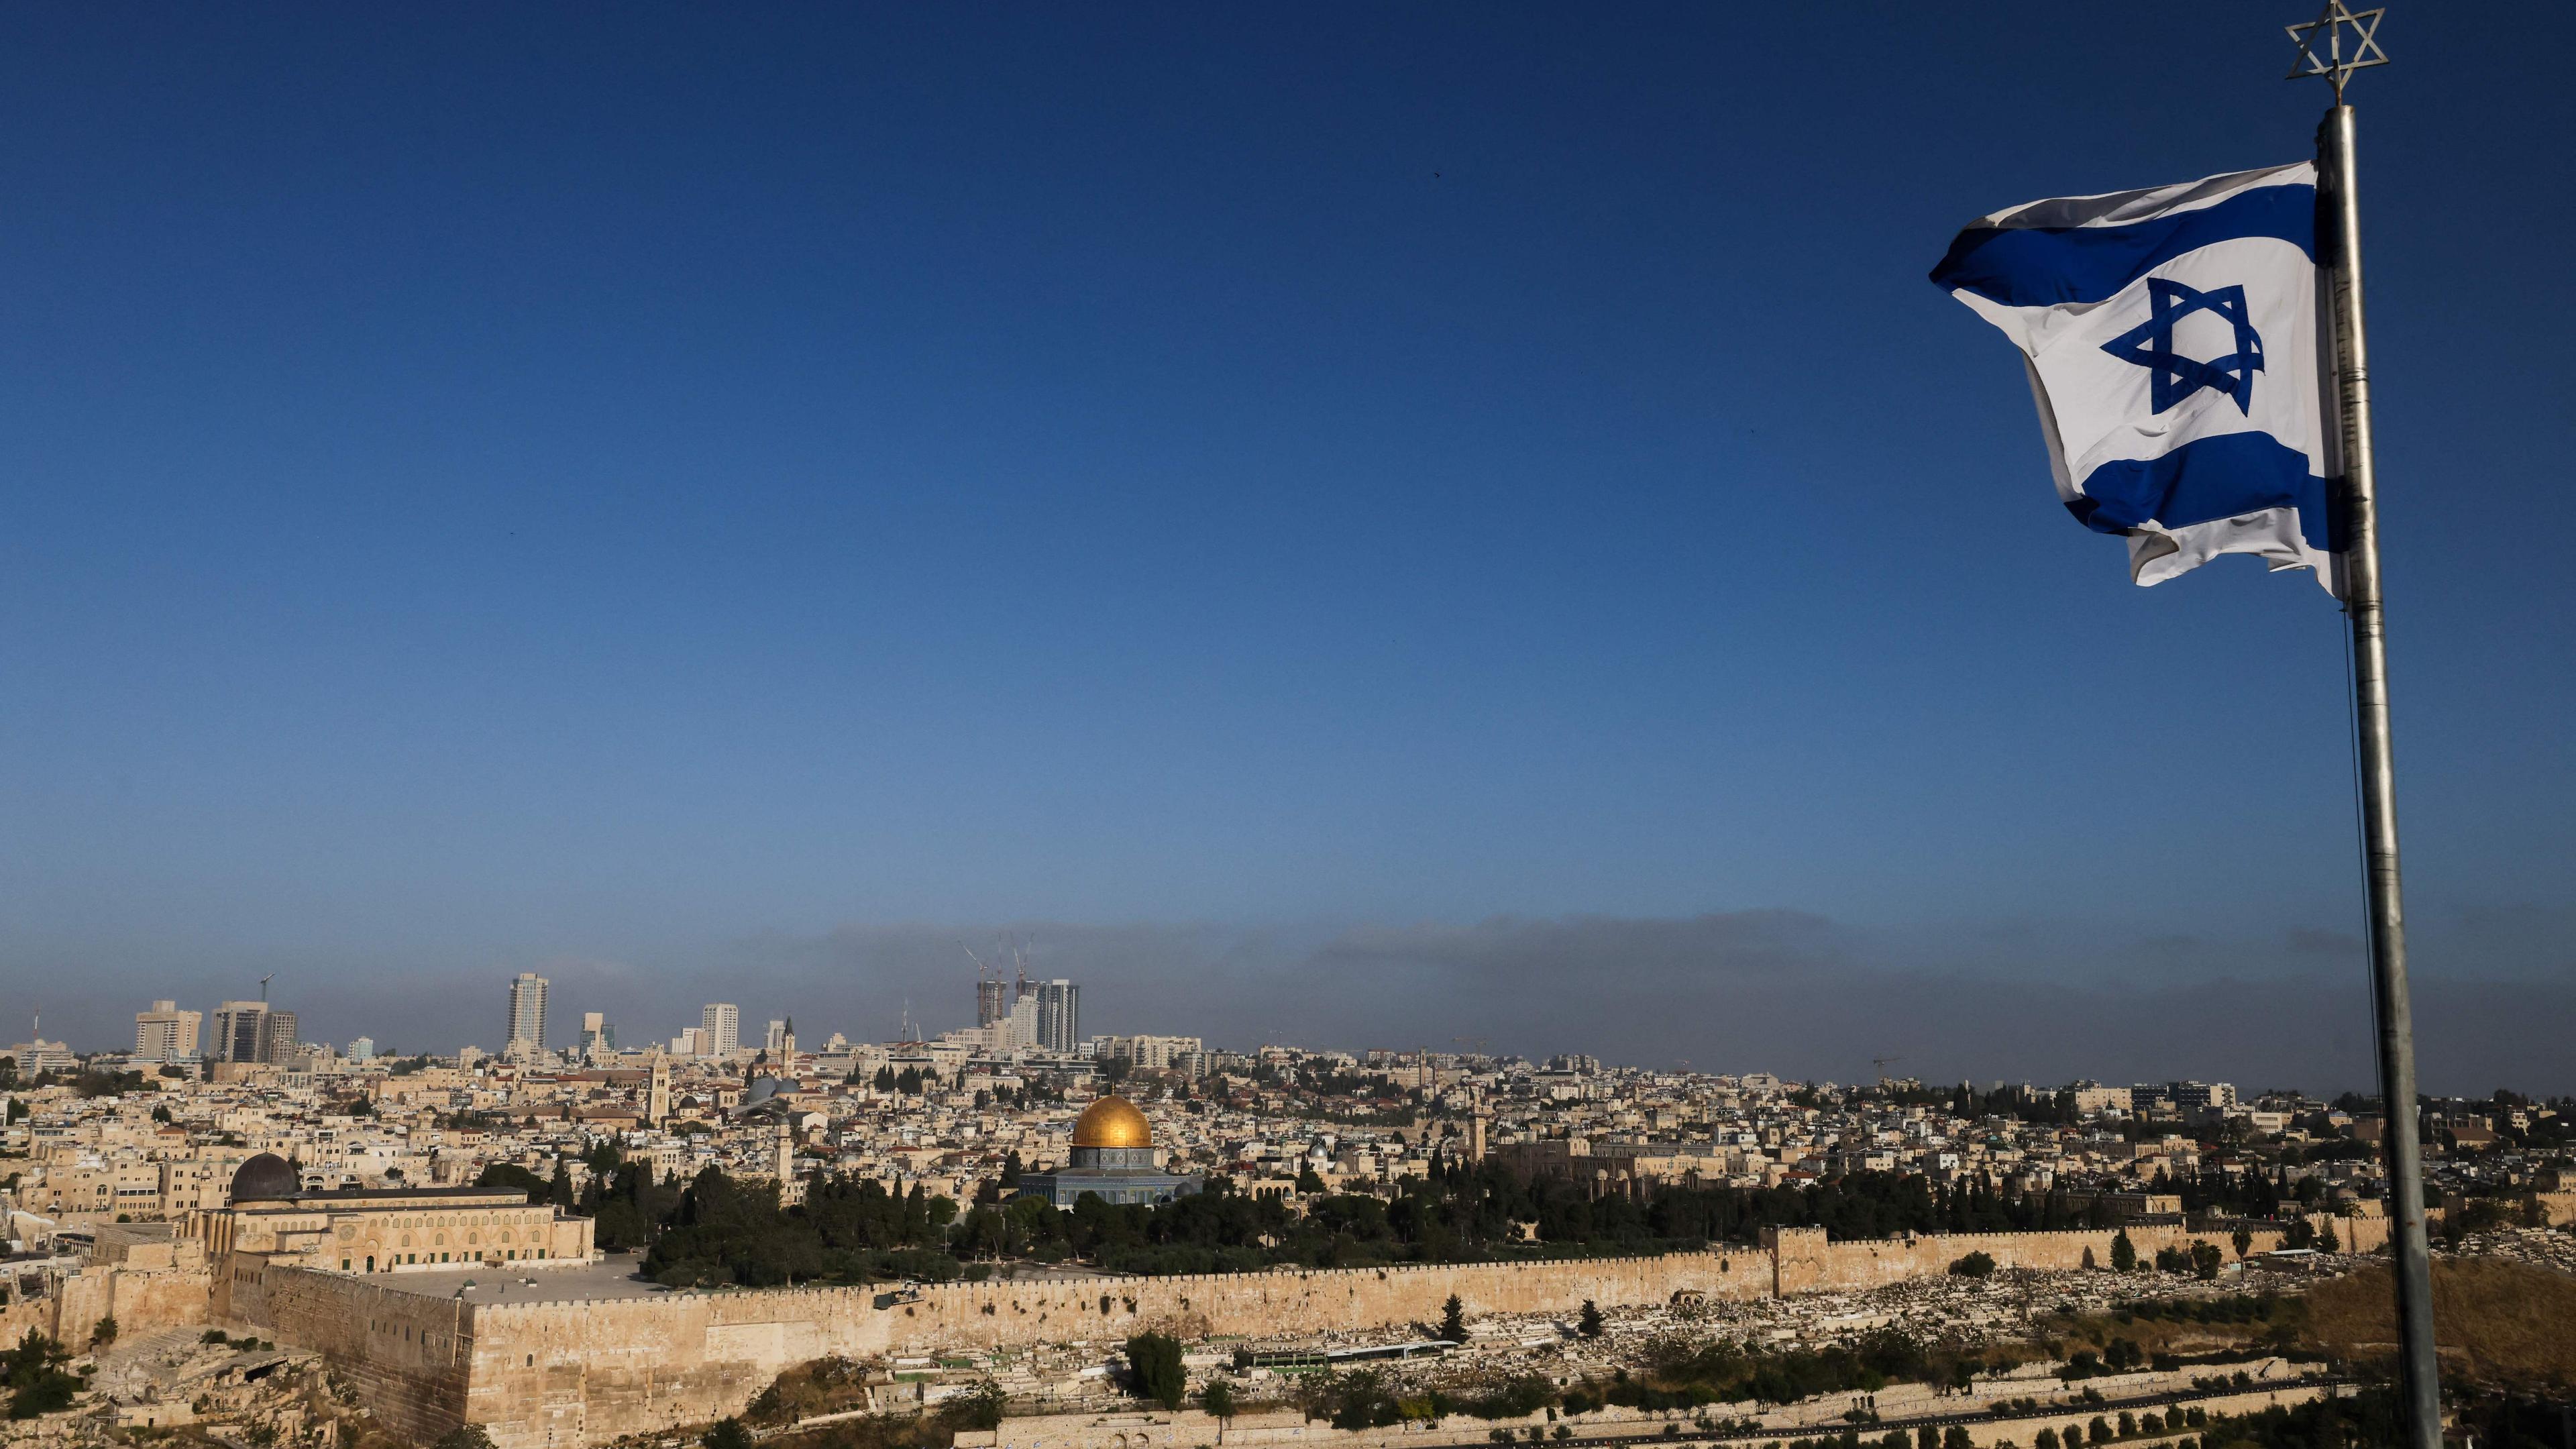 TOPSHOT - An Israeli flag flies on the Mount of Olives overlooking the Al Aqsa mosque compound and the city skyline in Jerusalem on April 19, 2024. US media quoted officials saying Israel had carried out retaliatory strikes on its arch-rival Iran, while Iran's state media reported explosions in the central province of Isfahan on April 19. (Photo by Ahmad GHARABLI / AFP)